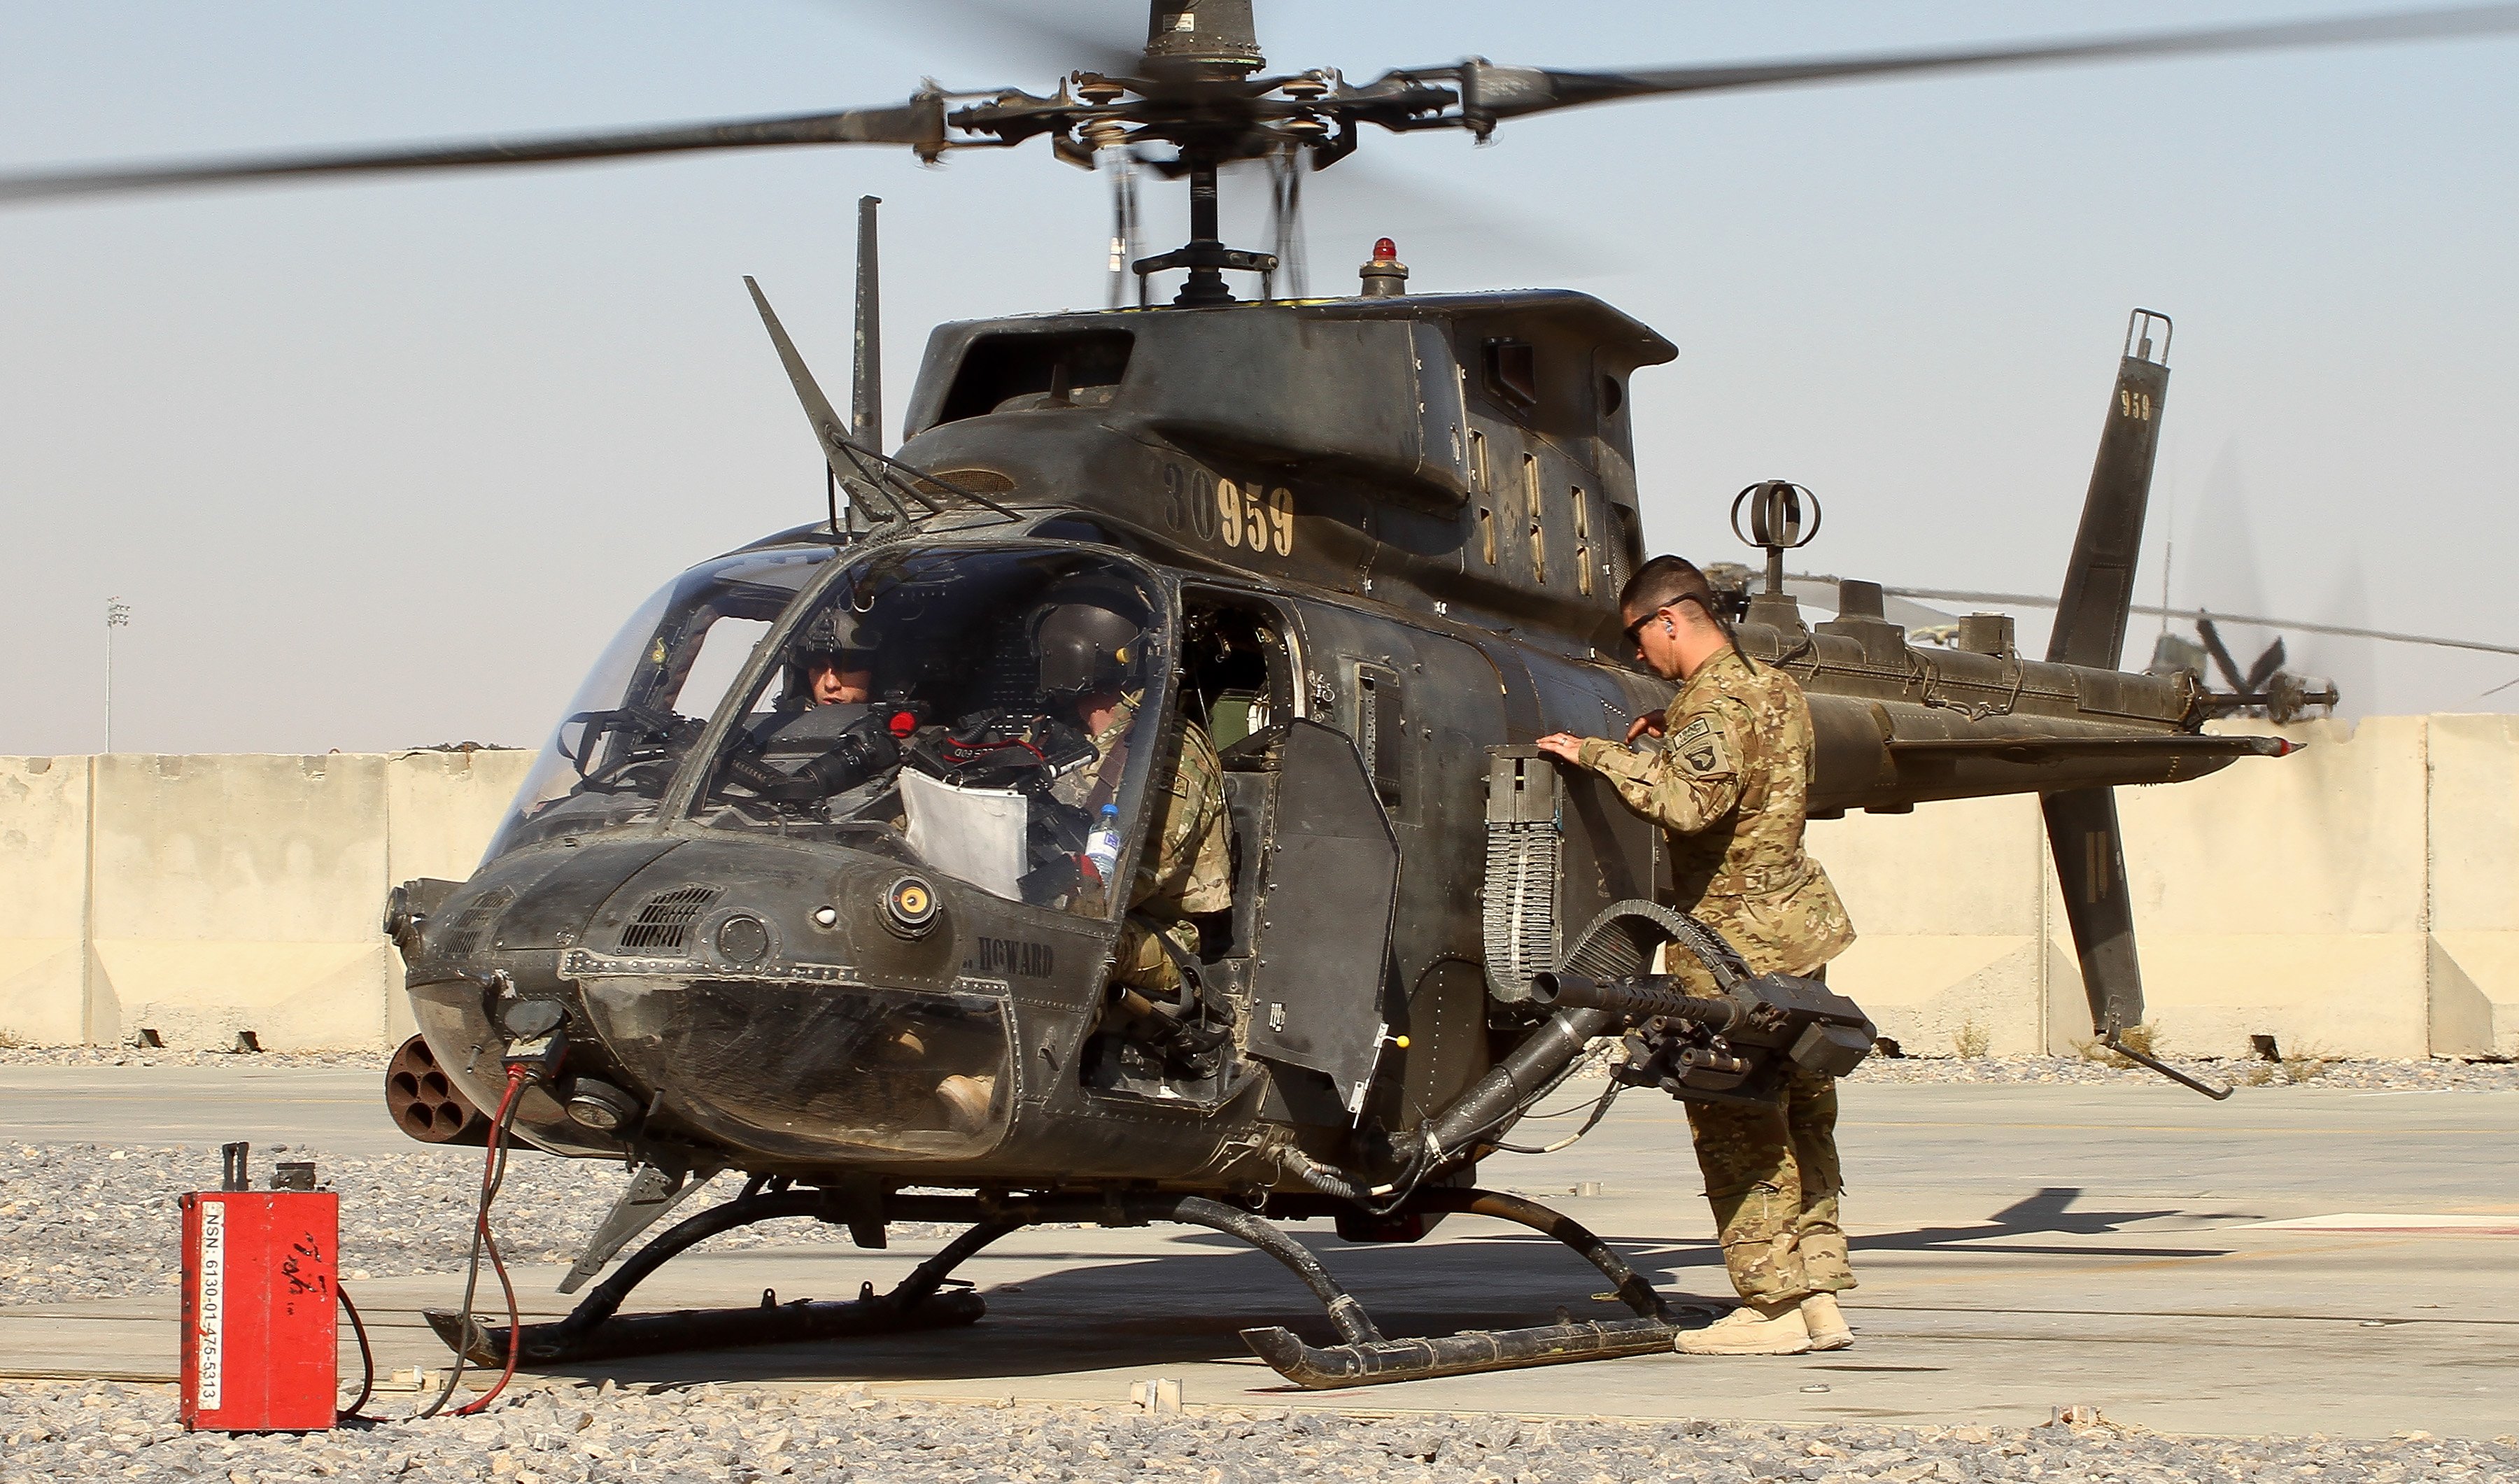 U.S Army OH 58D Kiowa Warrior Armed Reconnaissance Helicopter